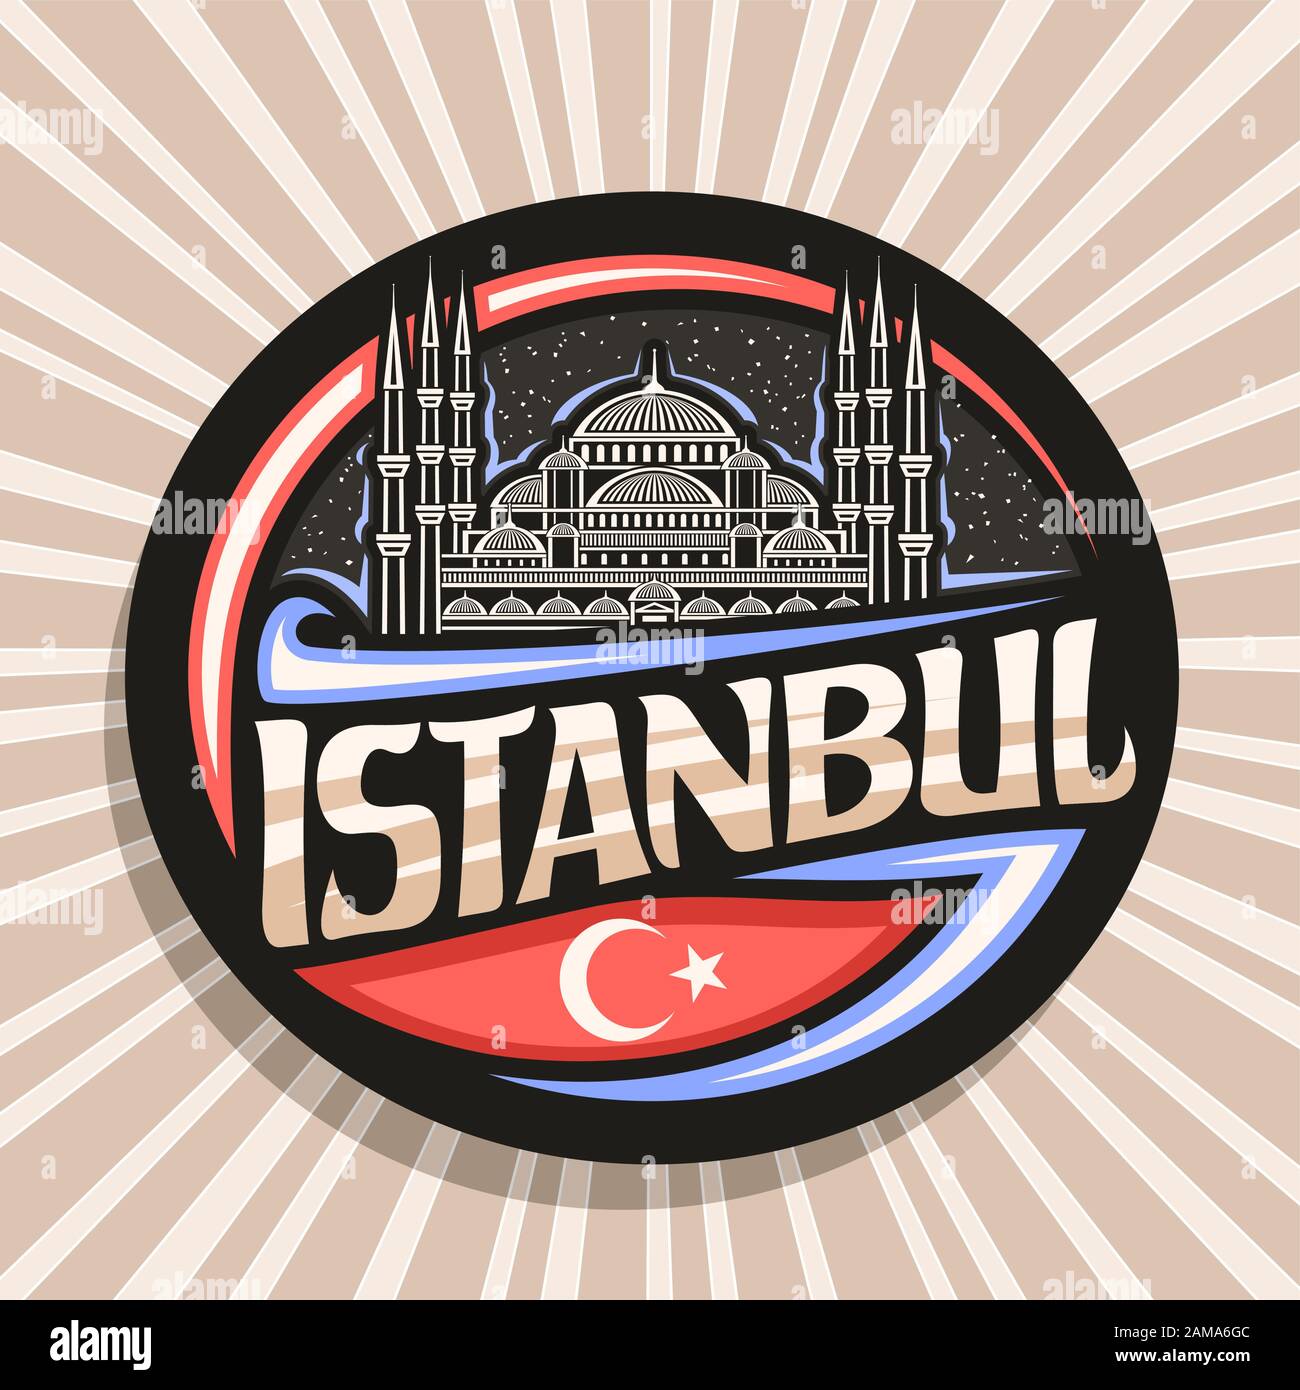 Vector logo for Istanbul, dark decorative round tag with draw illustration of Sultanahmet Camii on sky background, tourist fridge magnet with brush ty Stock Vector